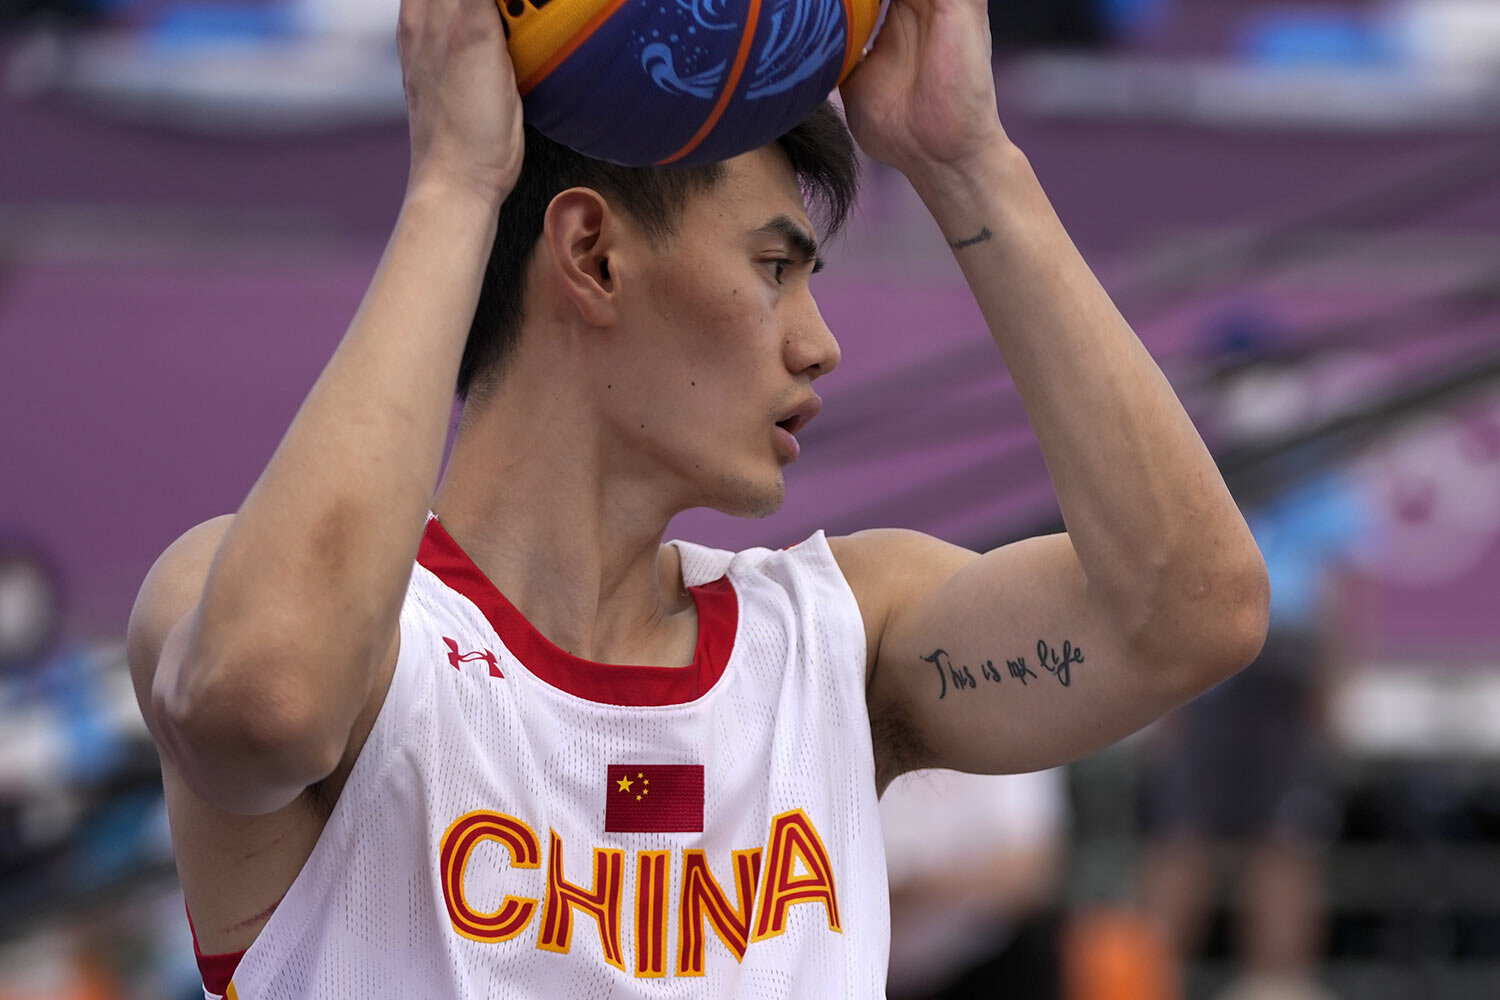  China's Yan Peng has a tattoo on his arm during a men's 3-on-3 basketball game against Latvia at the 2020 Summer Olympics, Sunday, July 25, 2021, in Tokyo, Japan. (AP Photo/Jeff Roberson) 